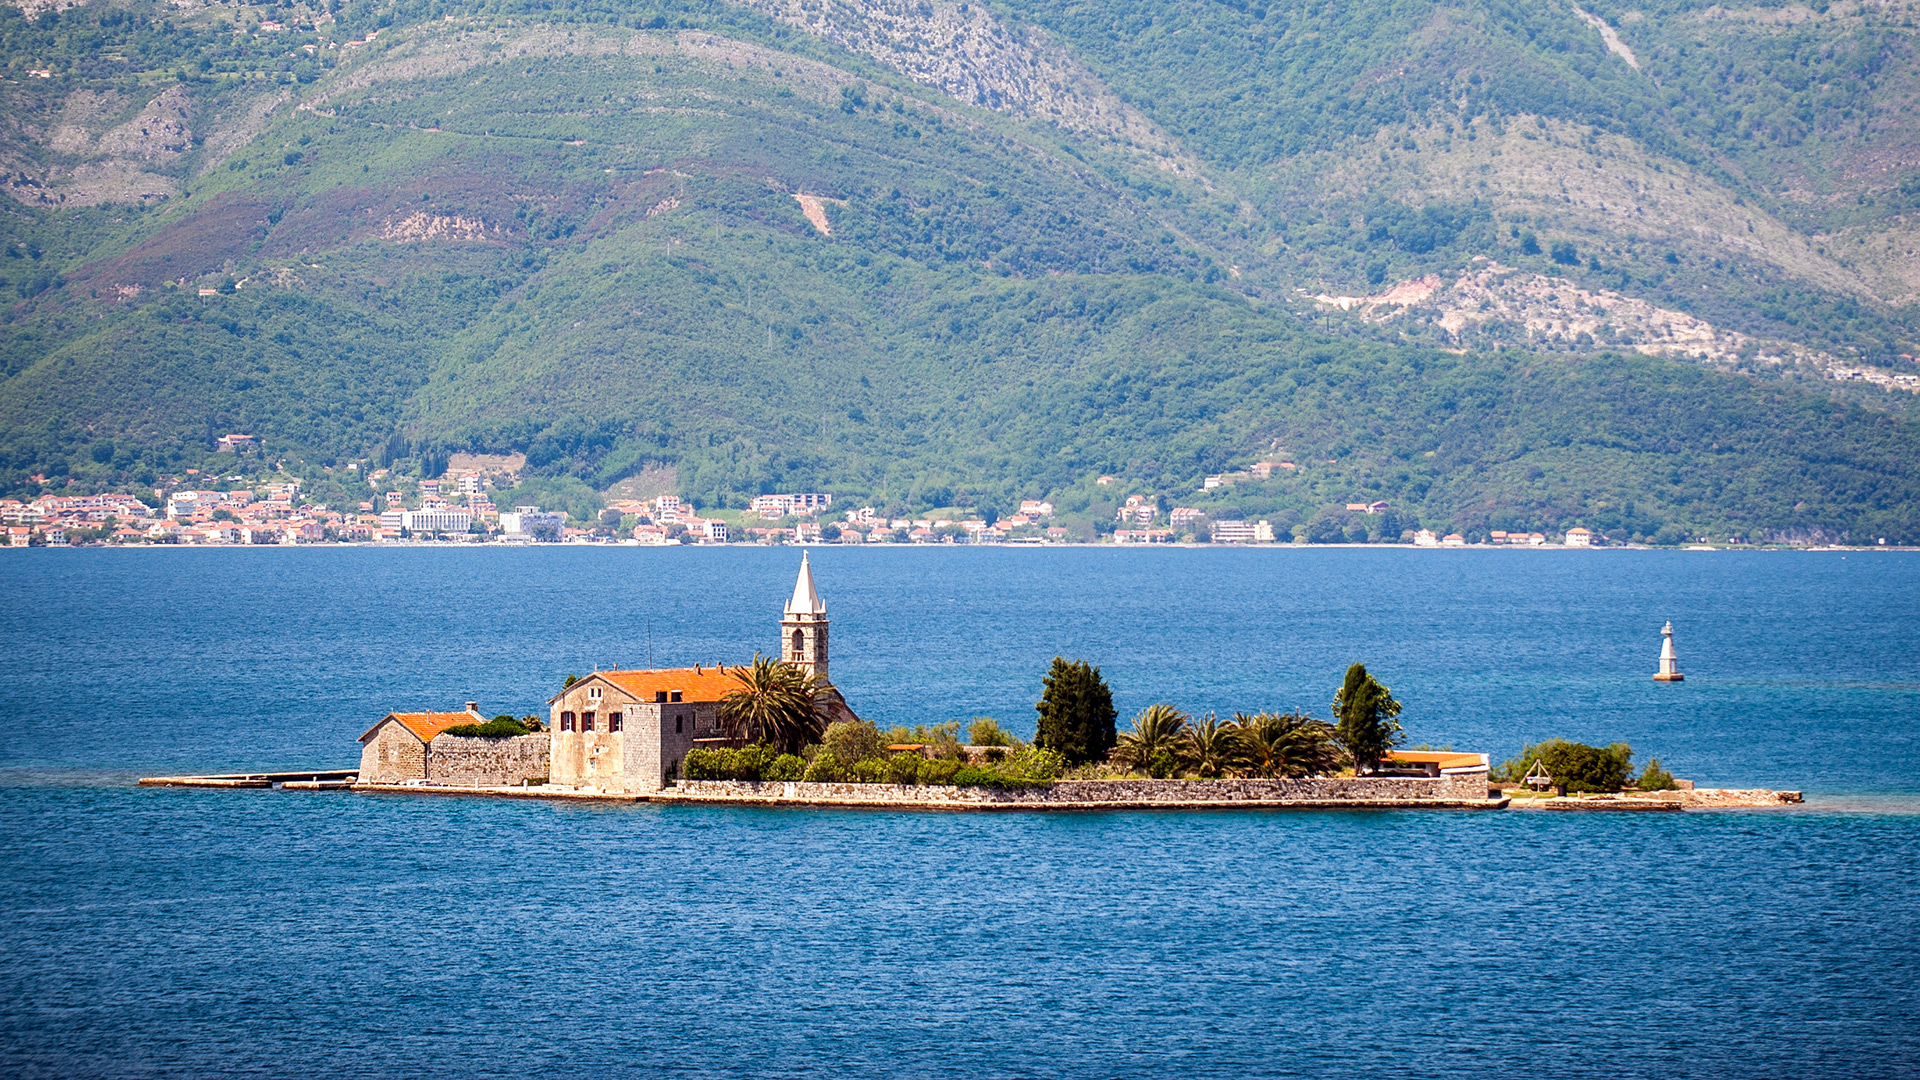 Island of Our Lady of Mercy of Mercy (Gospa od milosrđa) in Tivat Bay, Tivat, Montenegro